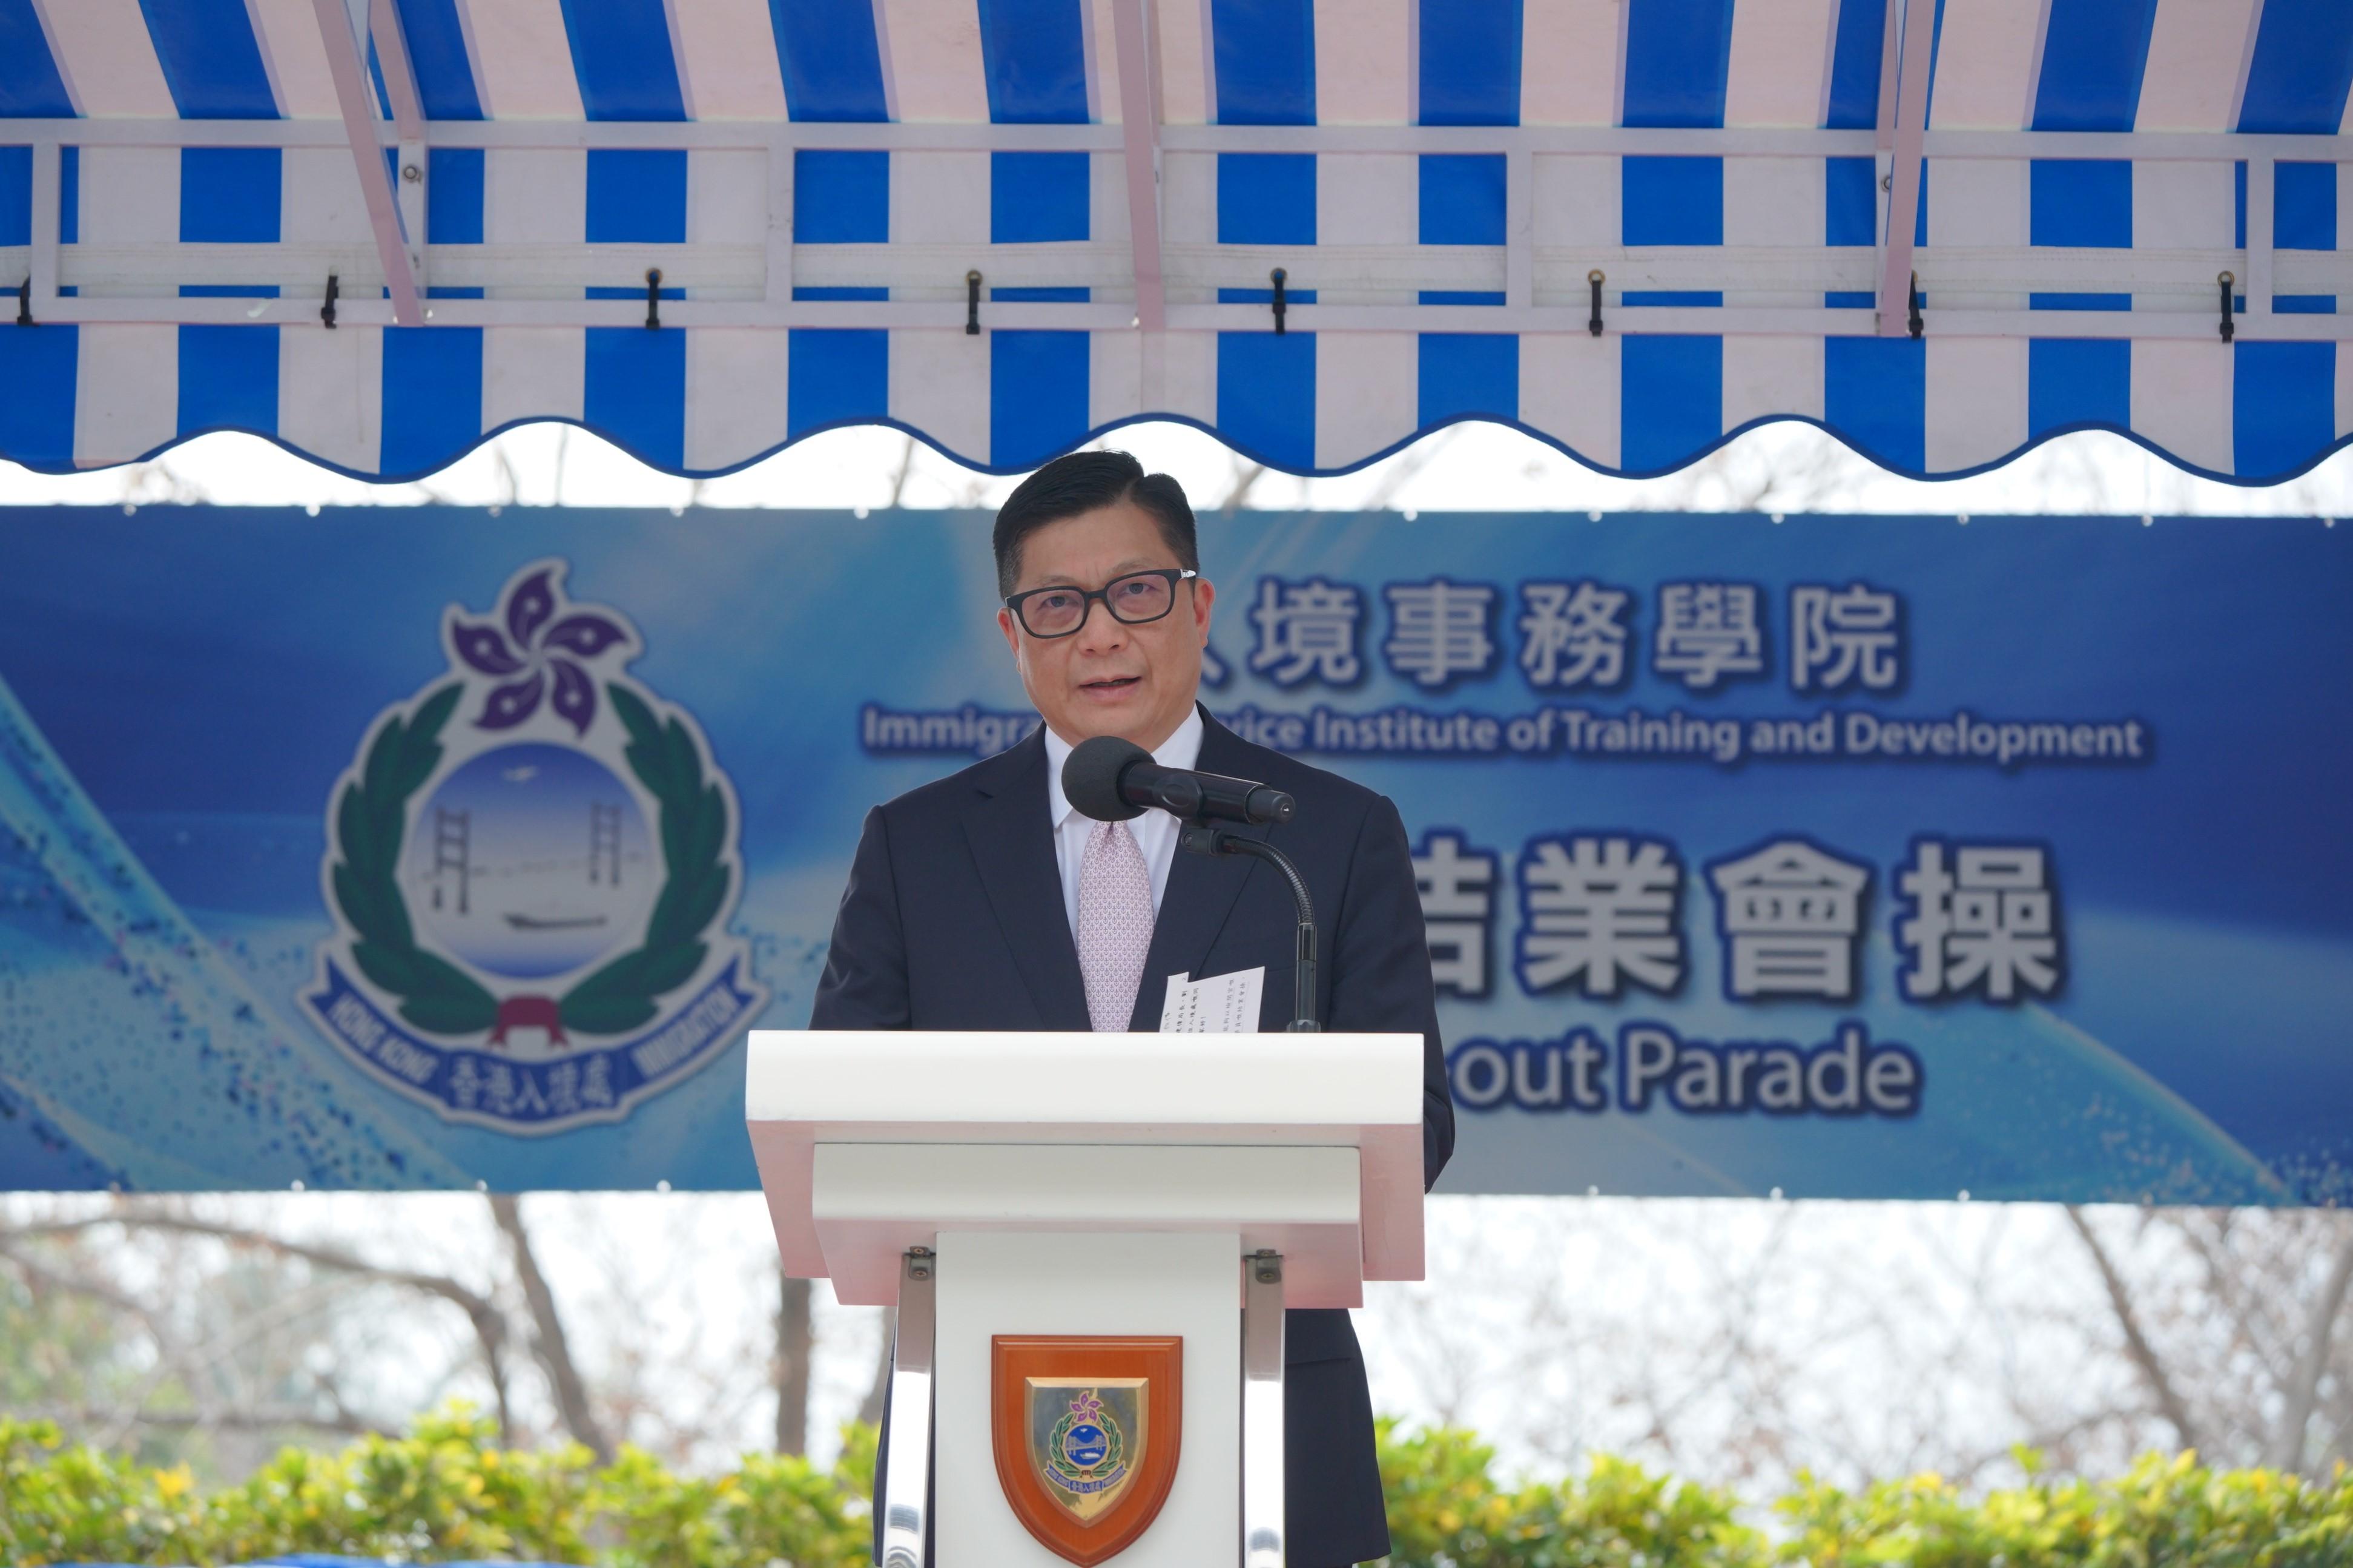 The Secretary for Security, Mr Tang Ping-keung, delivers a speech at the Immigration Service Institute of Training and Development Passing-out Parade today (March 15).